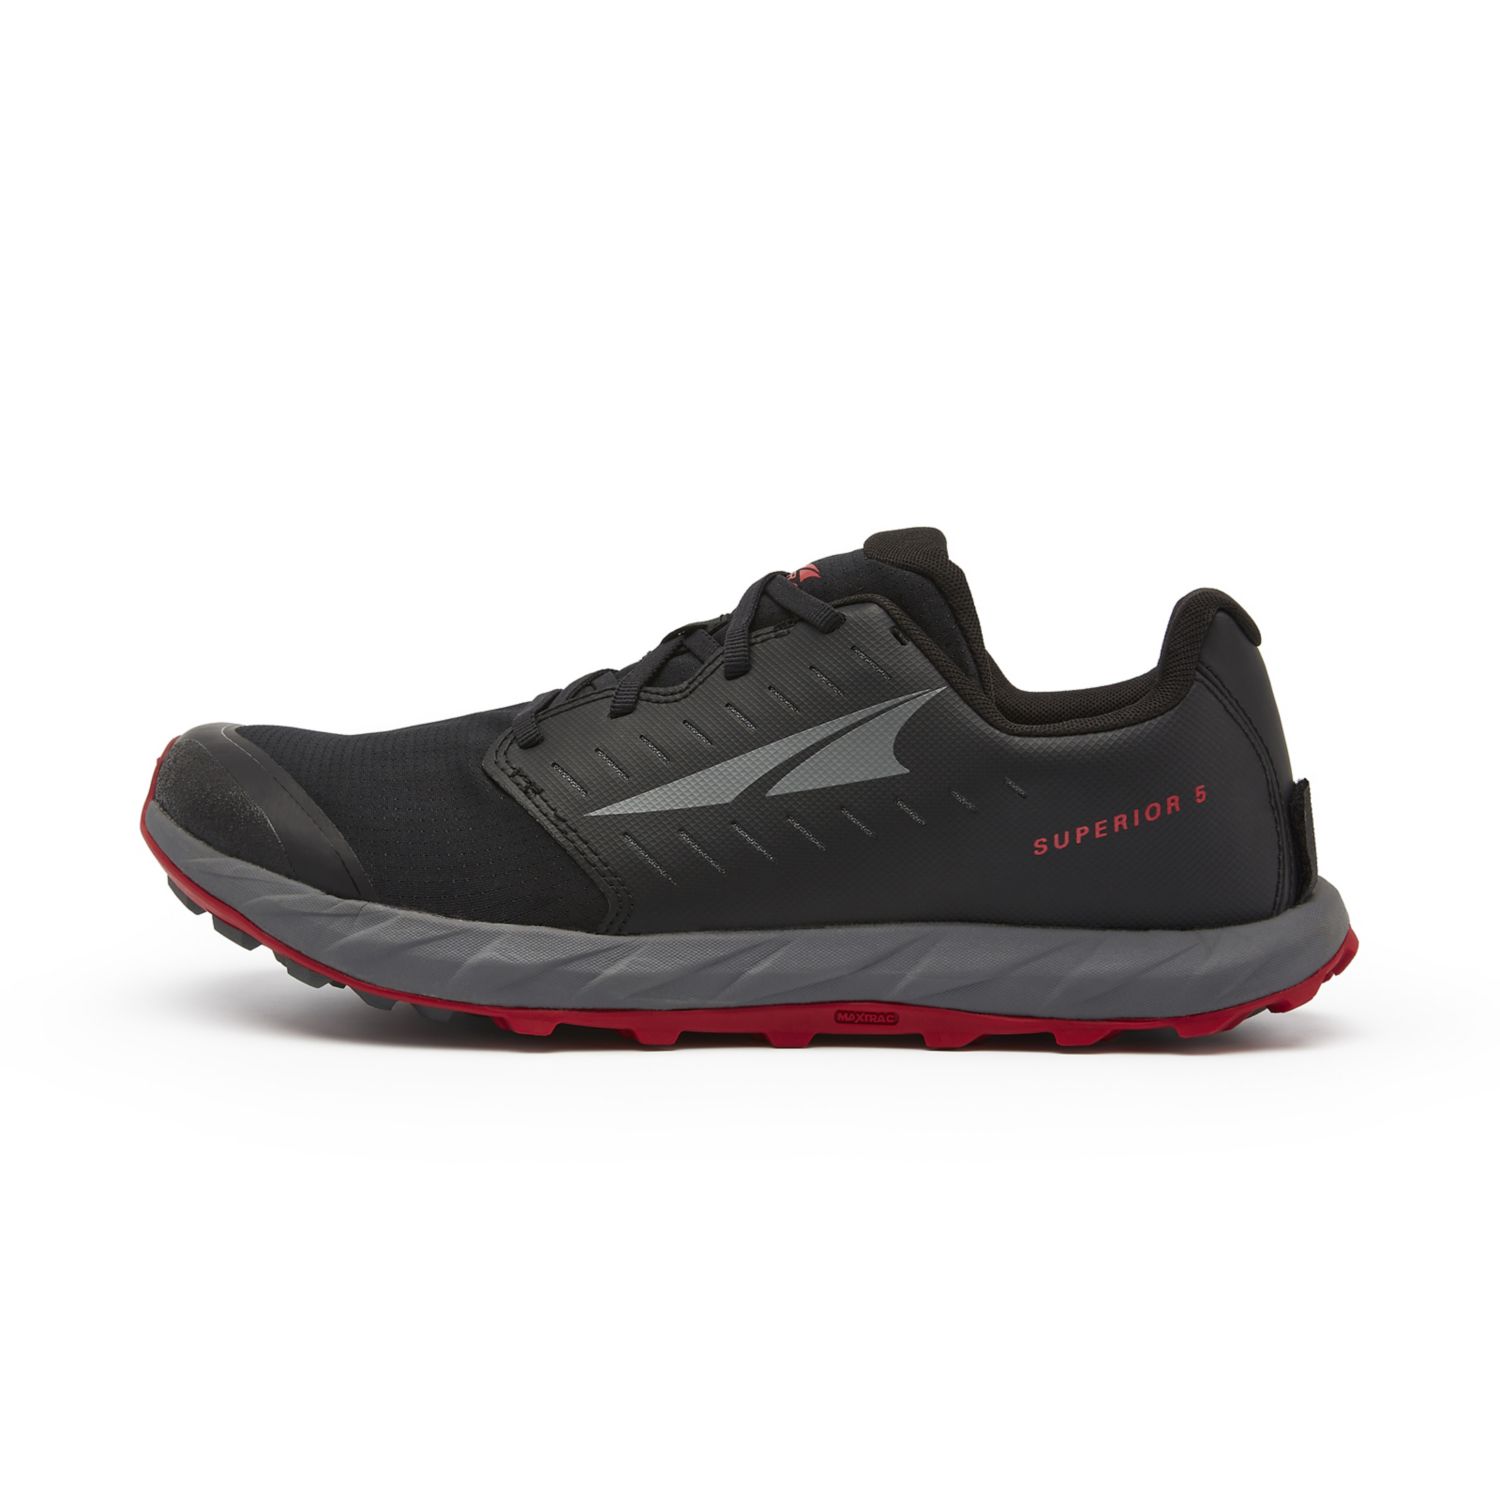 Black / Red Altra Superior 5 Men's Trail Running Shoes | Ireland-46915219